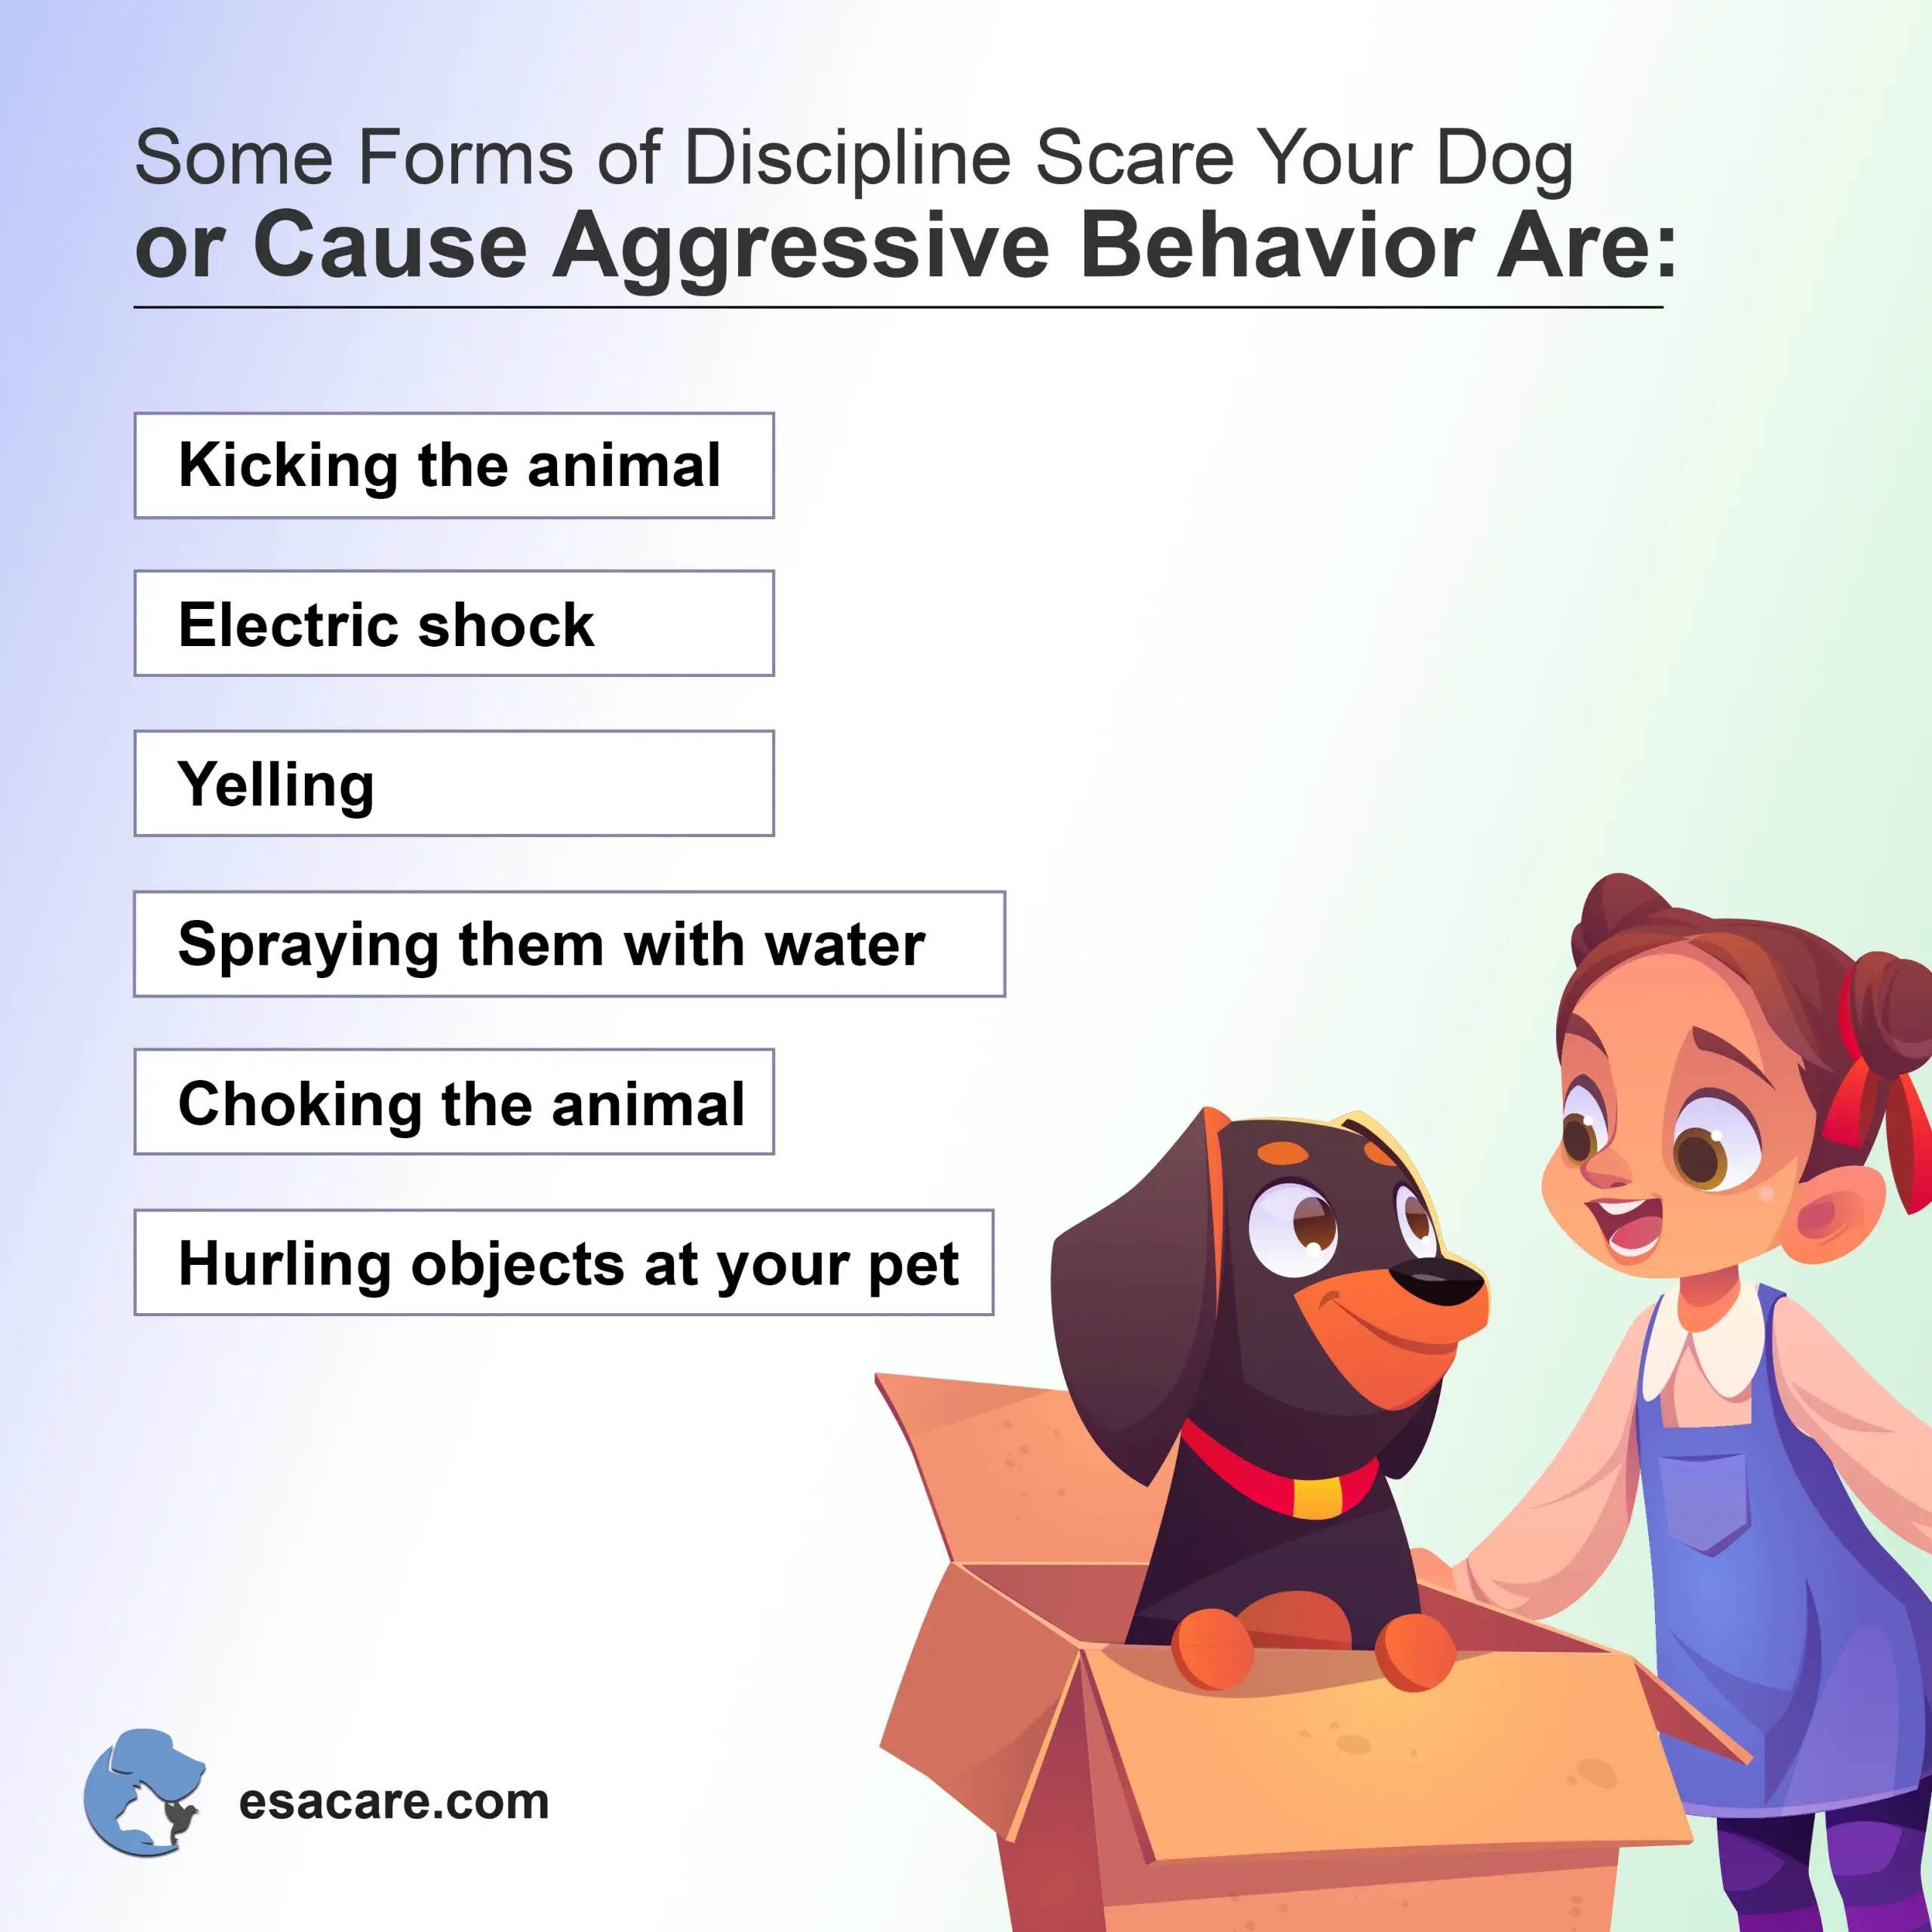 https://esacare.com/wp-content/uploads/2022/02/esacare_5-Activities-to-Keep-Your-Dog-Entertained-Indoors_image_1-scaled.jpg.webp